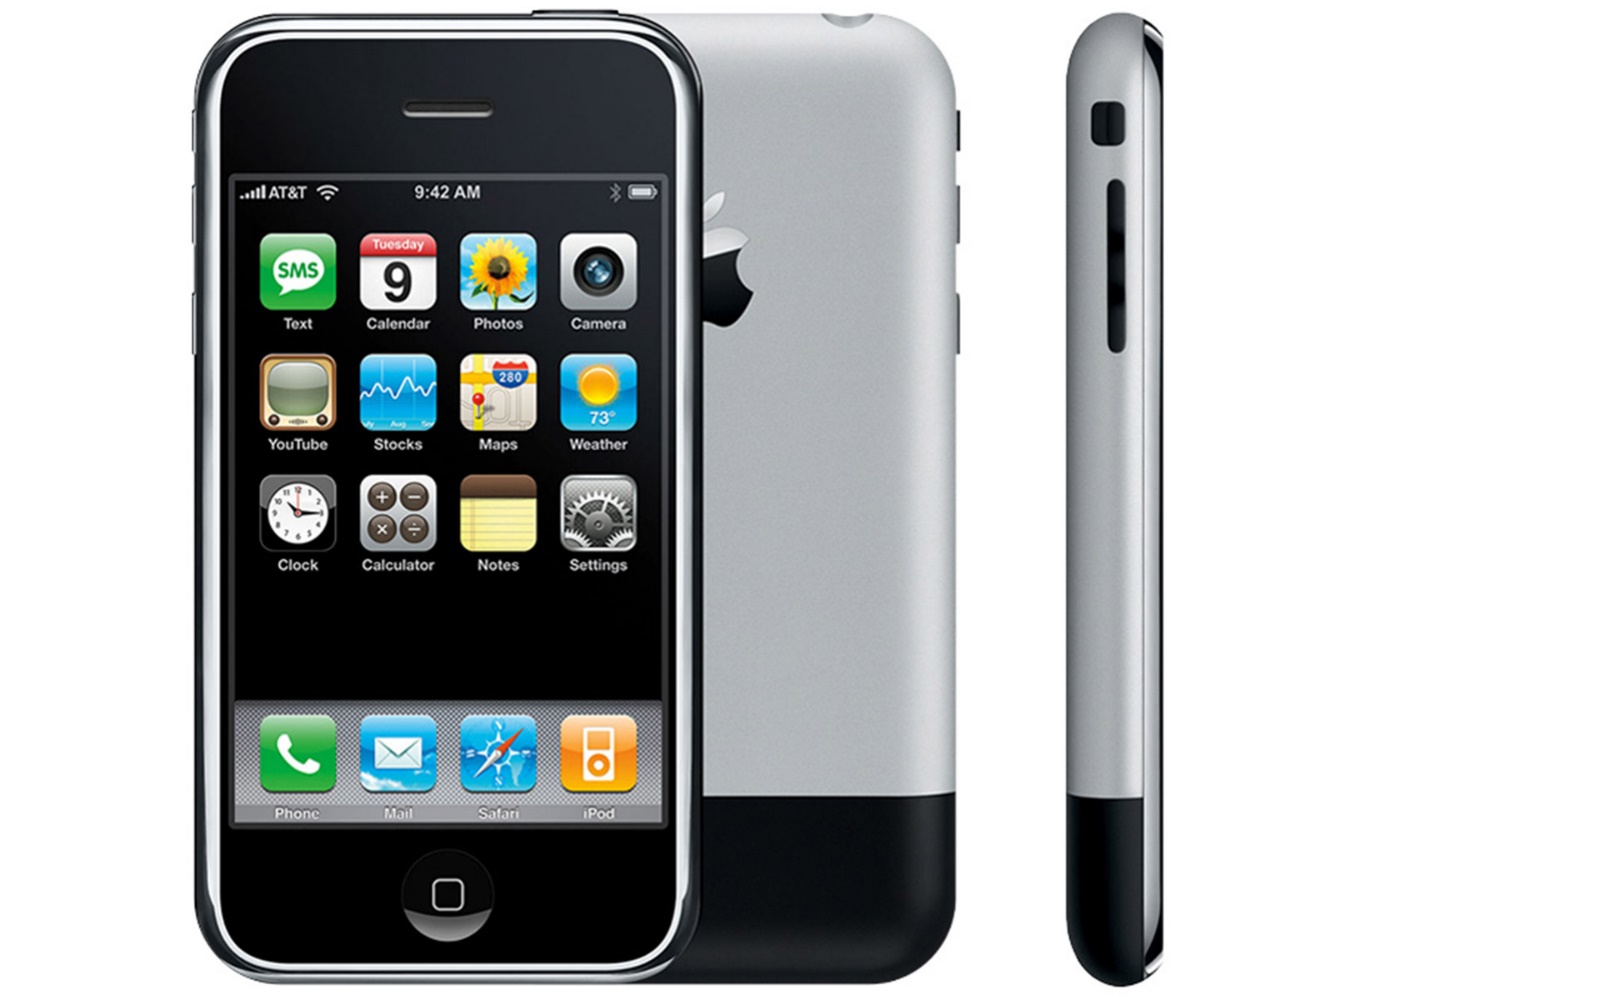 The first generation iPhone from the front view, back and side